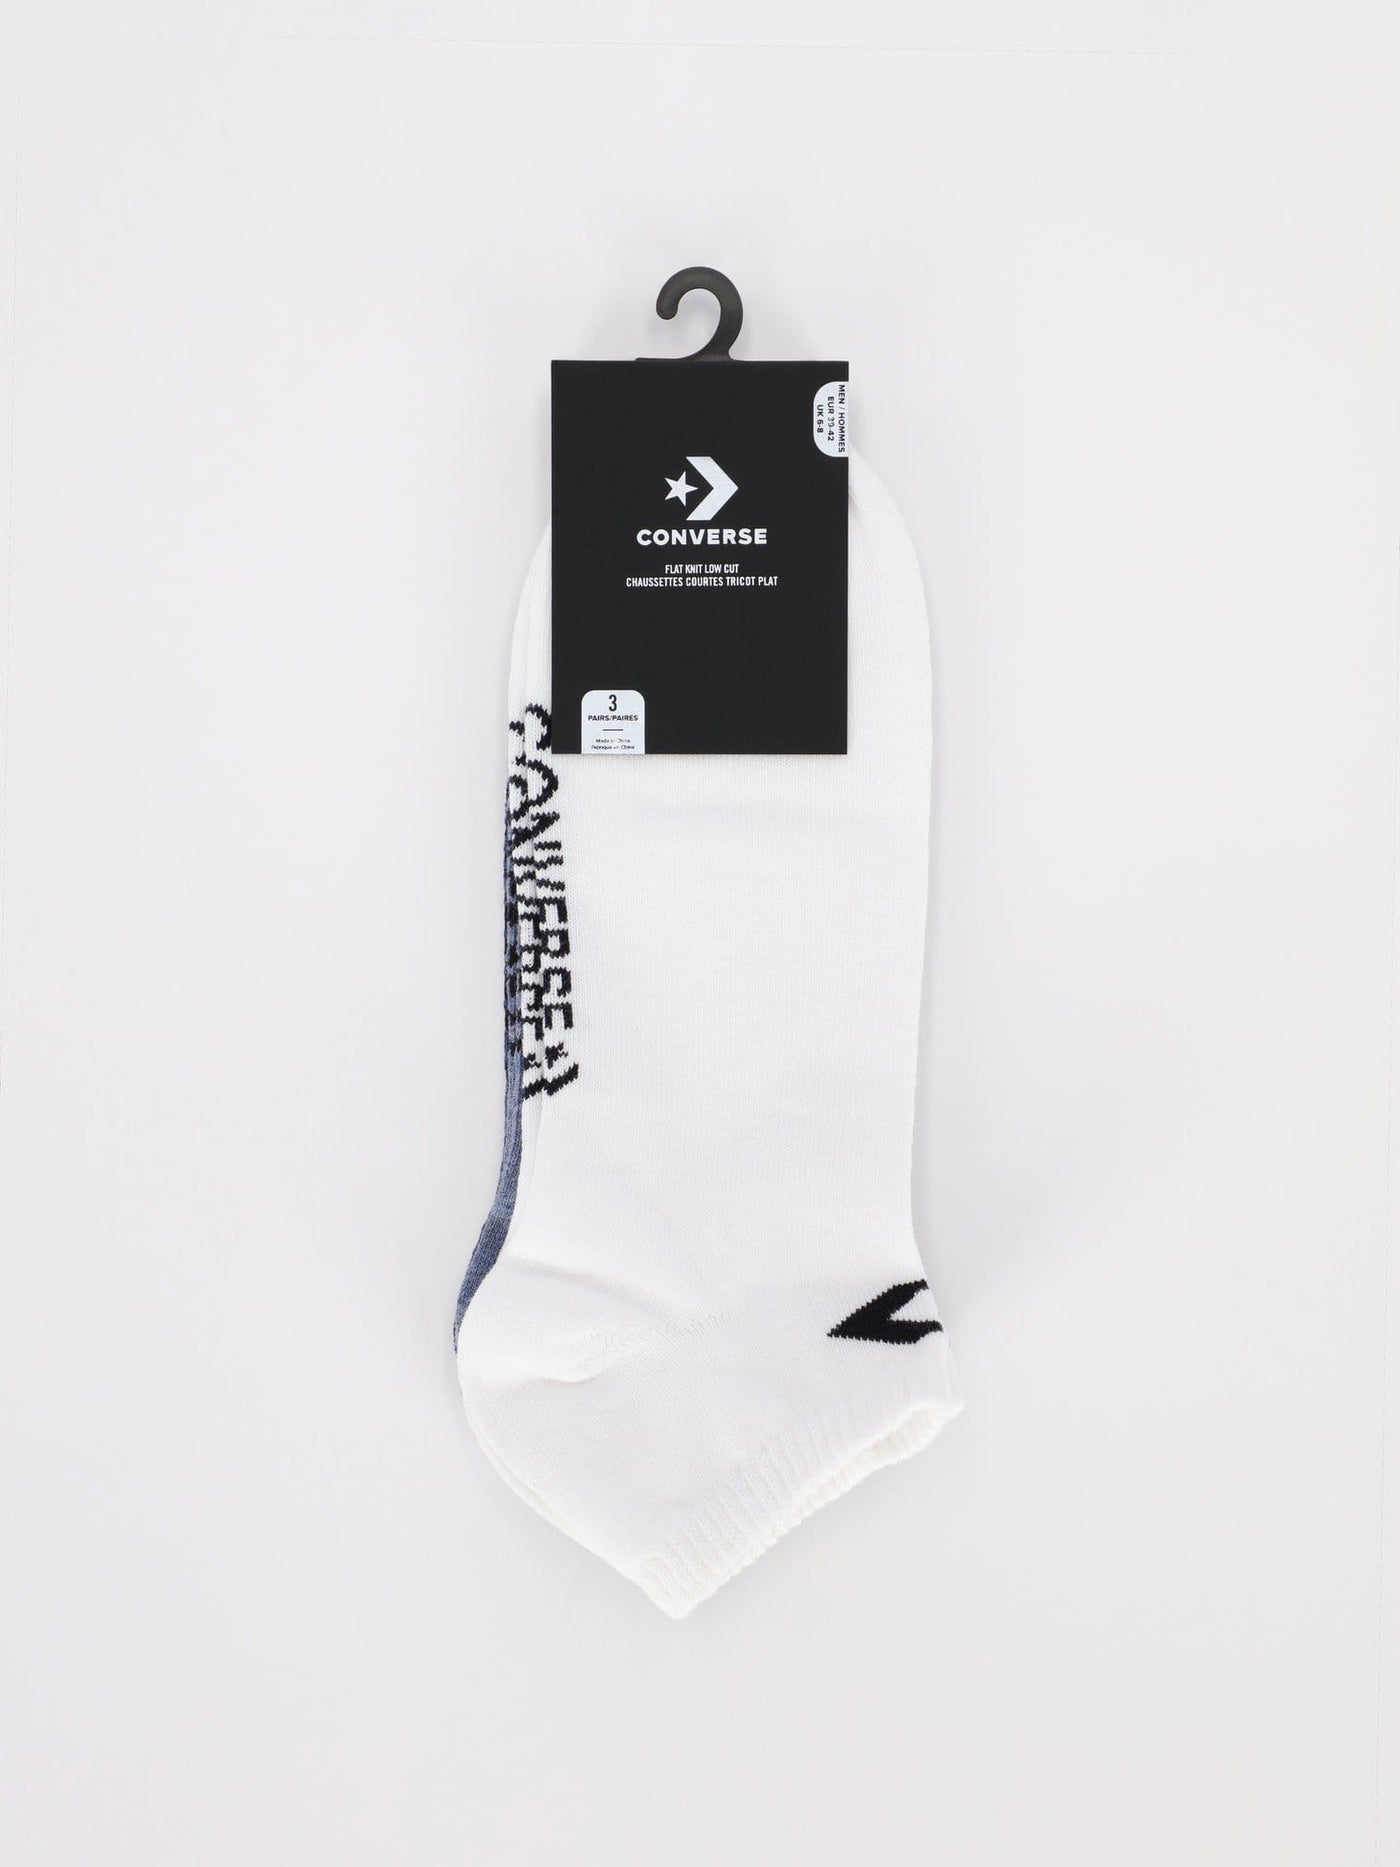 Converse Other Accessories 111 / 39-42 3 Pairs of Flat Knit Low Cut Socks with Star Chevron Logo -White/Denim/Navy